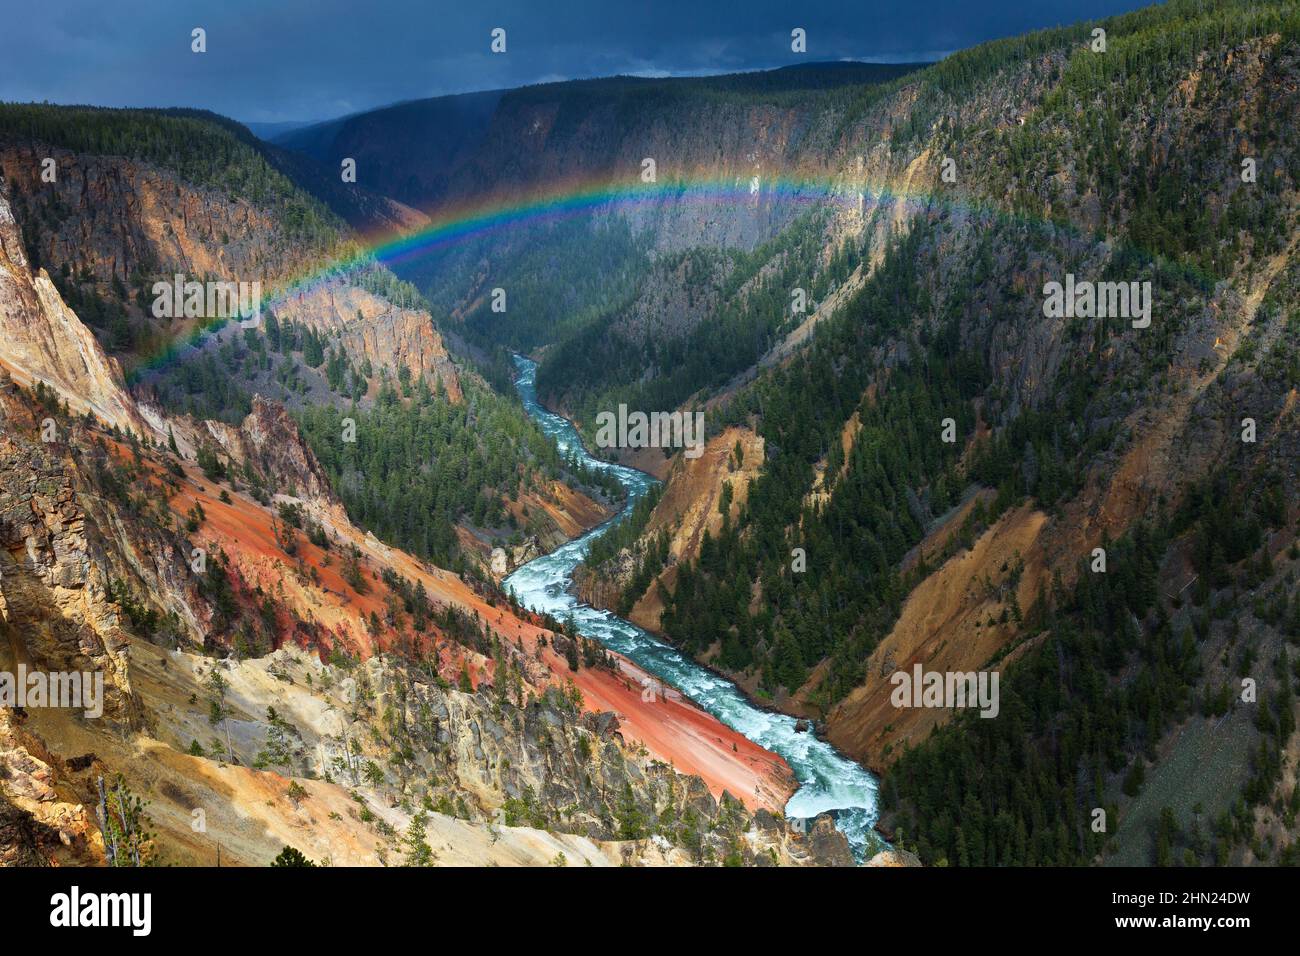 Rainbow and summer thunderstorm, over Yellowstone Grand Canyon and river, Yellowstone NP, Wyoming, USA Stock Photo